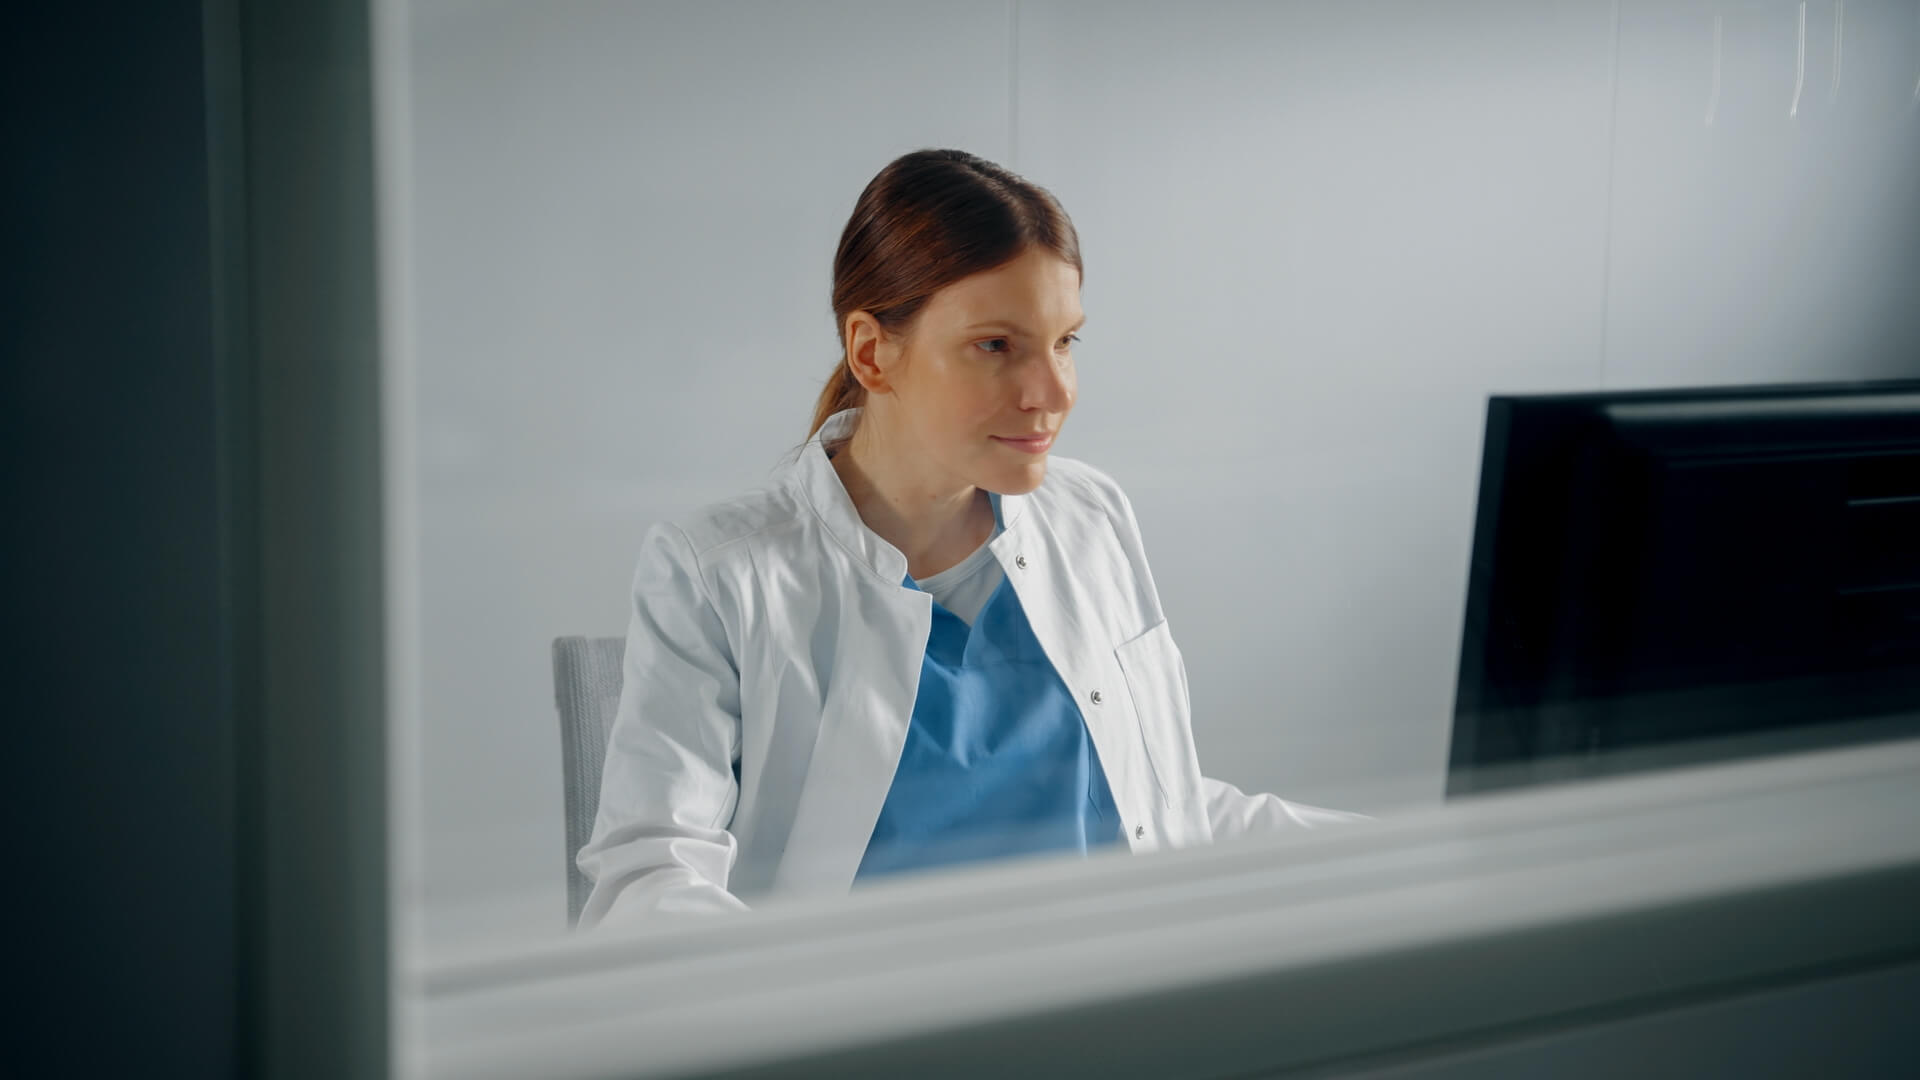 A physician seated at her desk, focusing on the computer screen